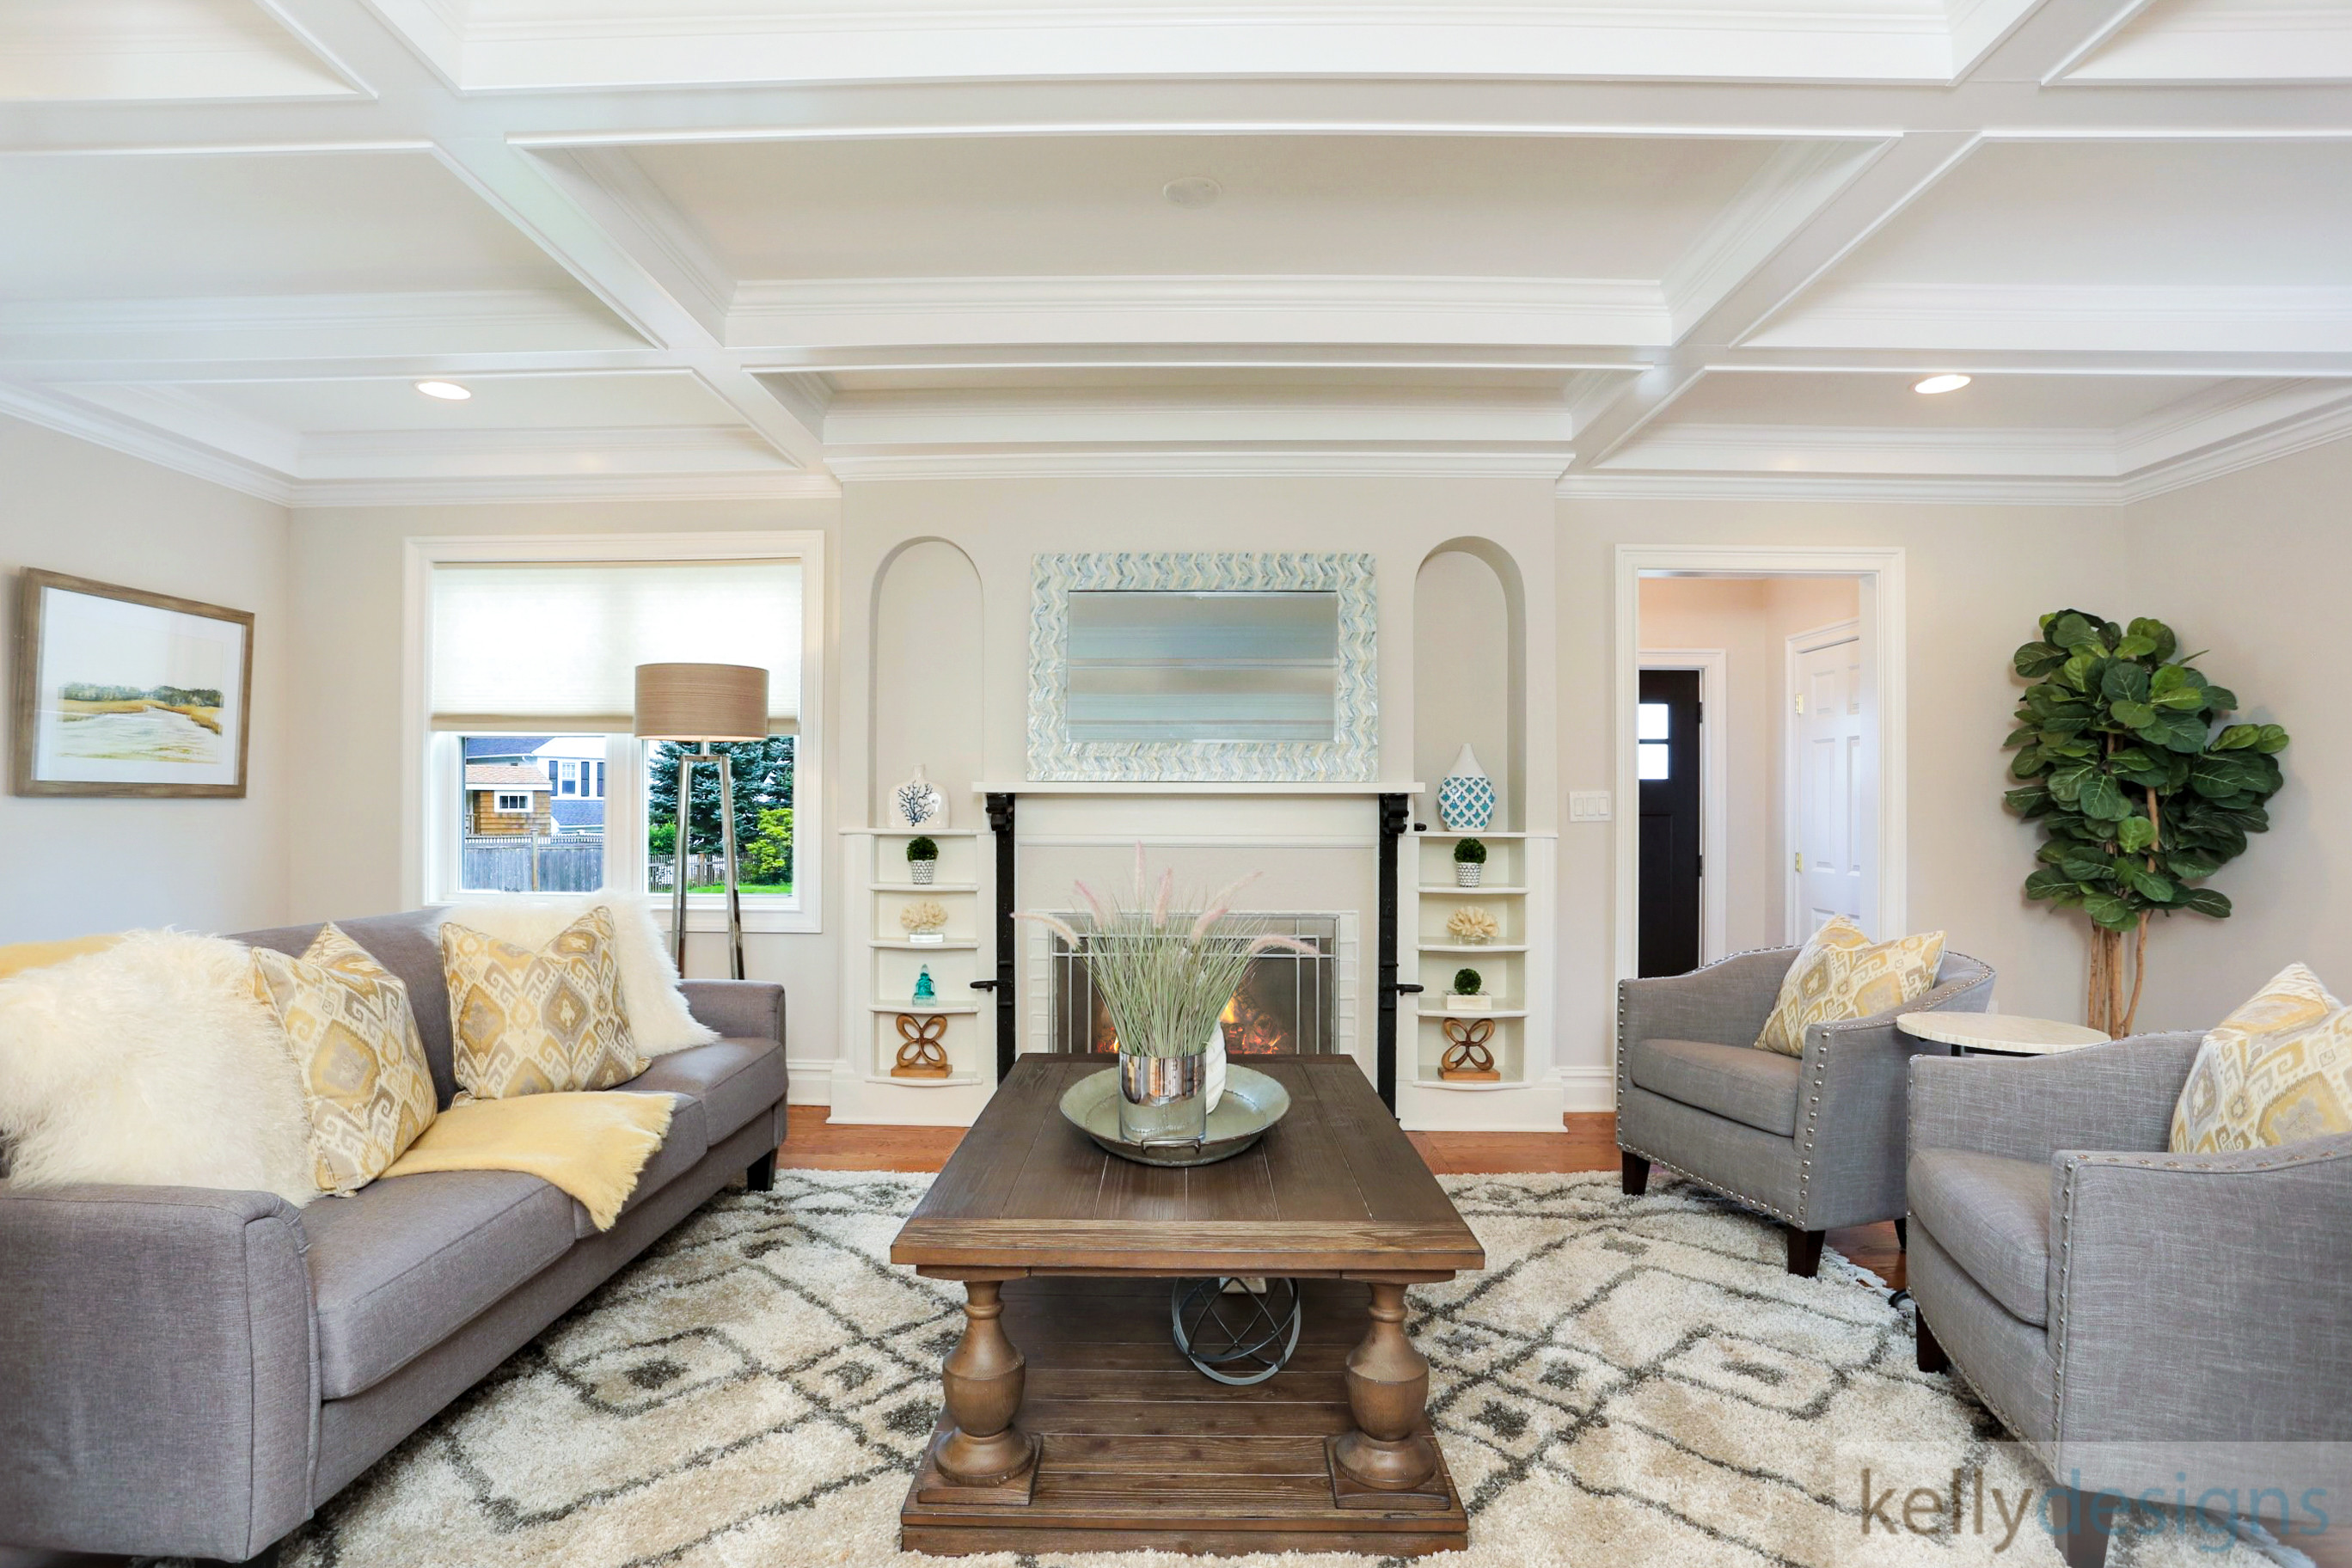 Staging Impeccable on Rockland - Living Room - Home Staging By kellydesigns